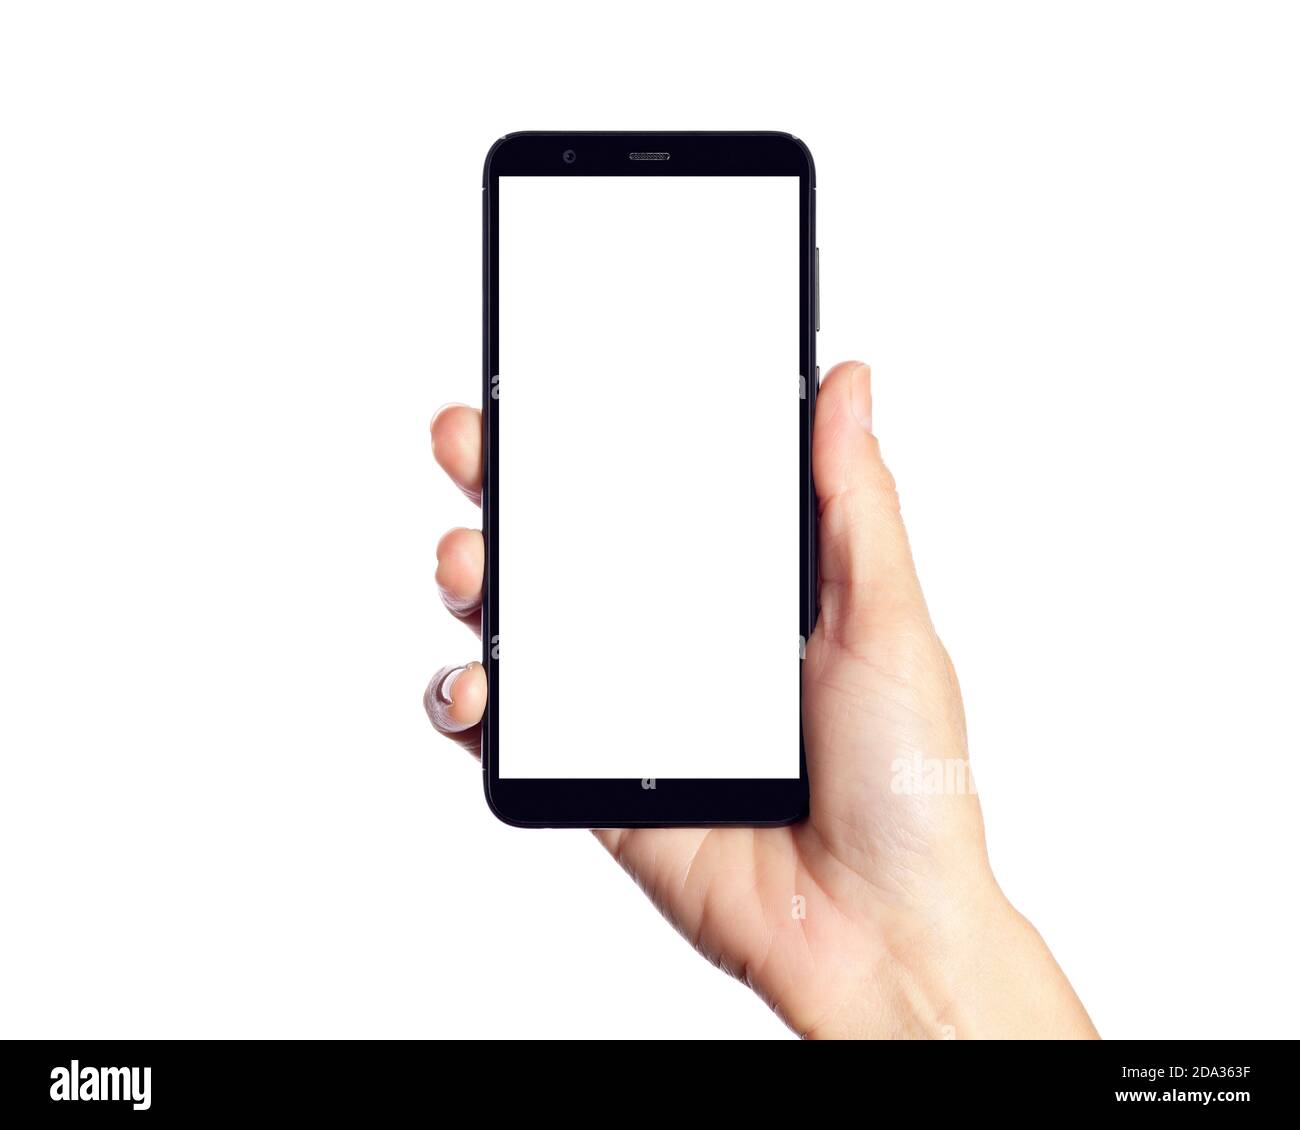 Hand Holding a Blank Smartphone Against a White Background Stock Photo